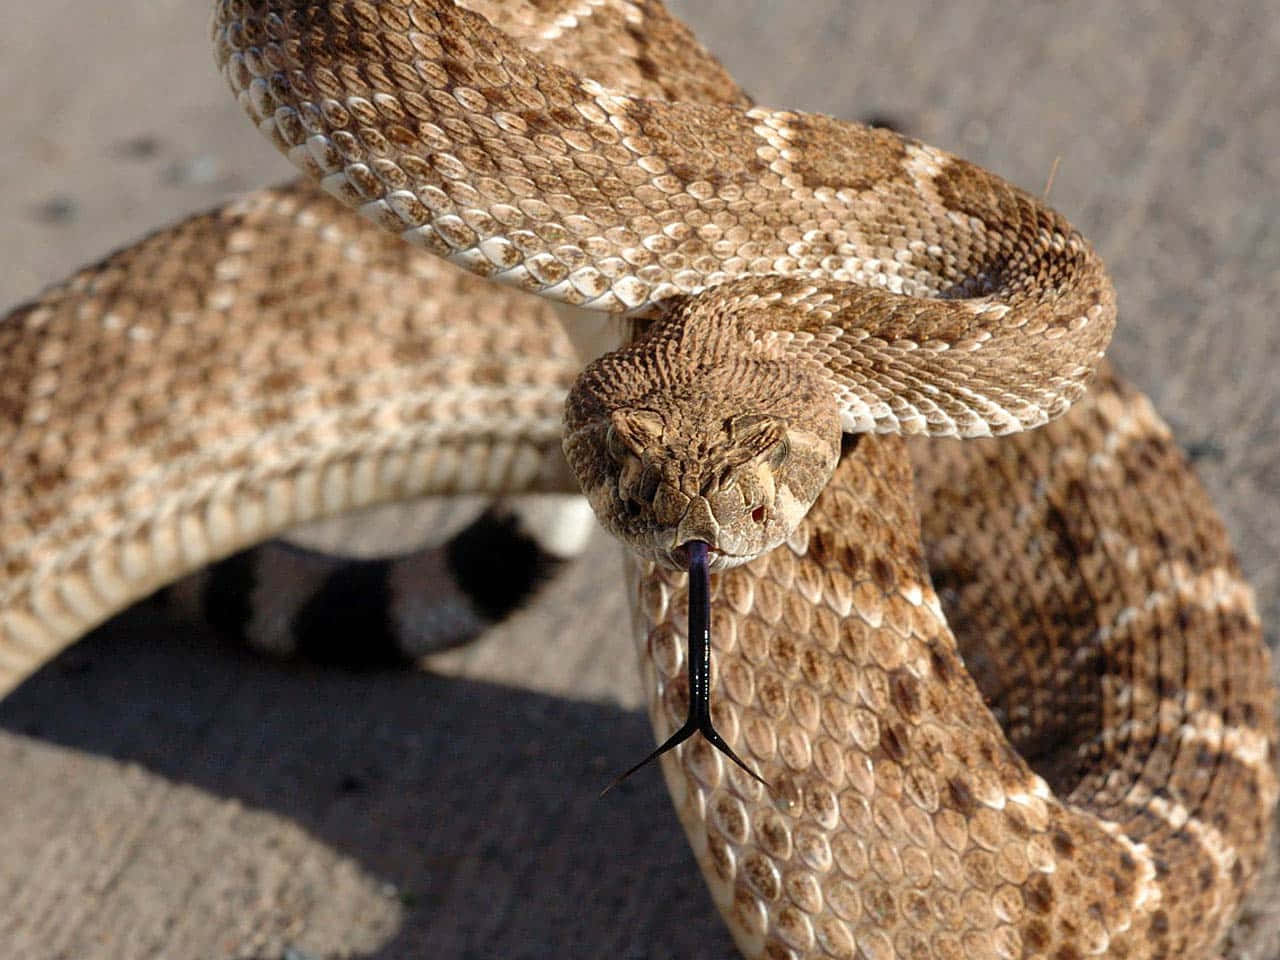 A Rattle Snake With Its Mouth Open